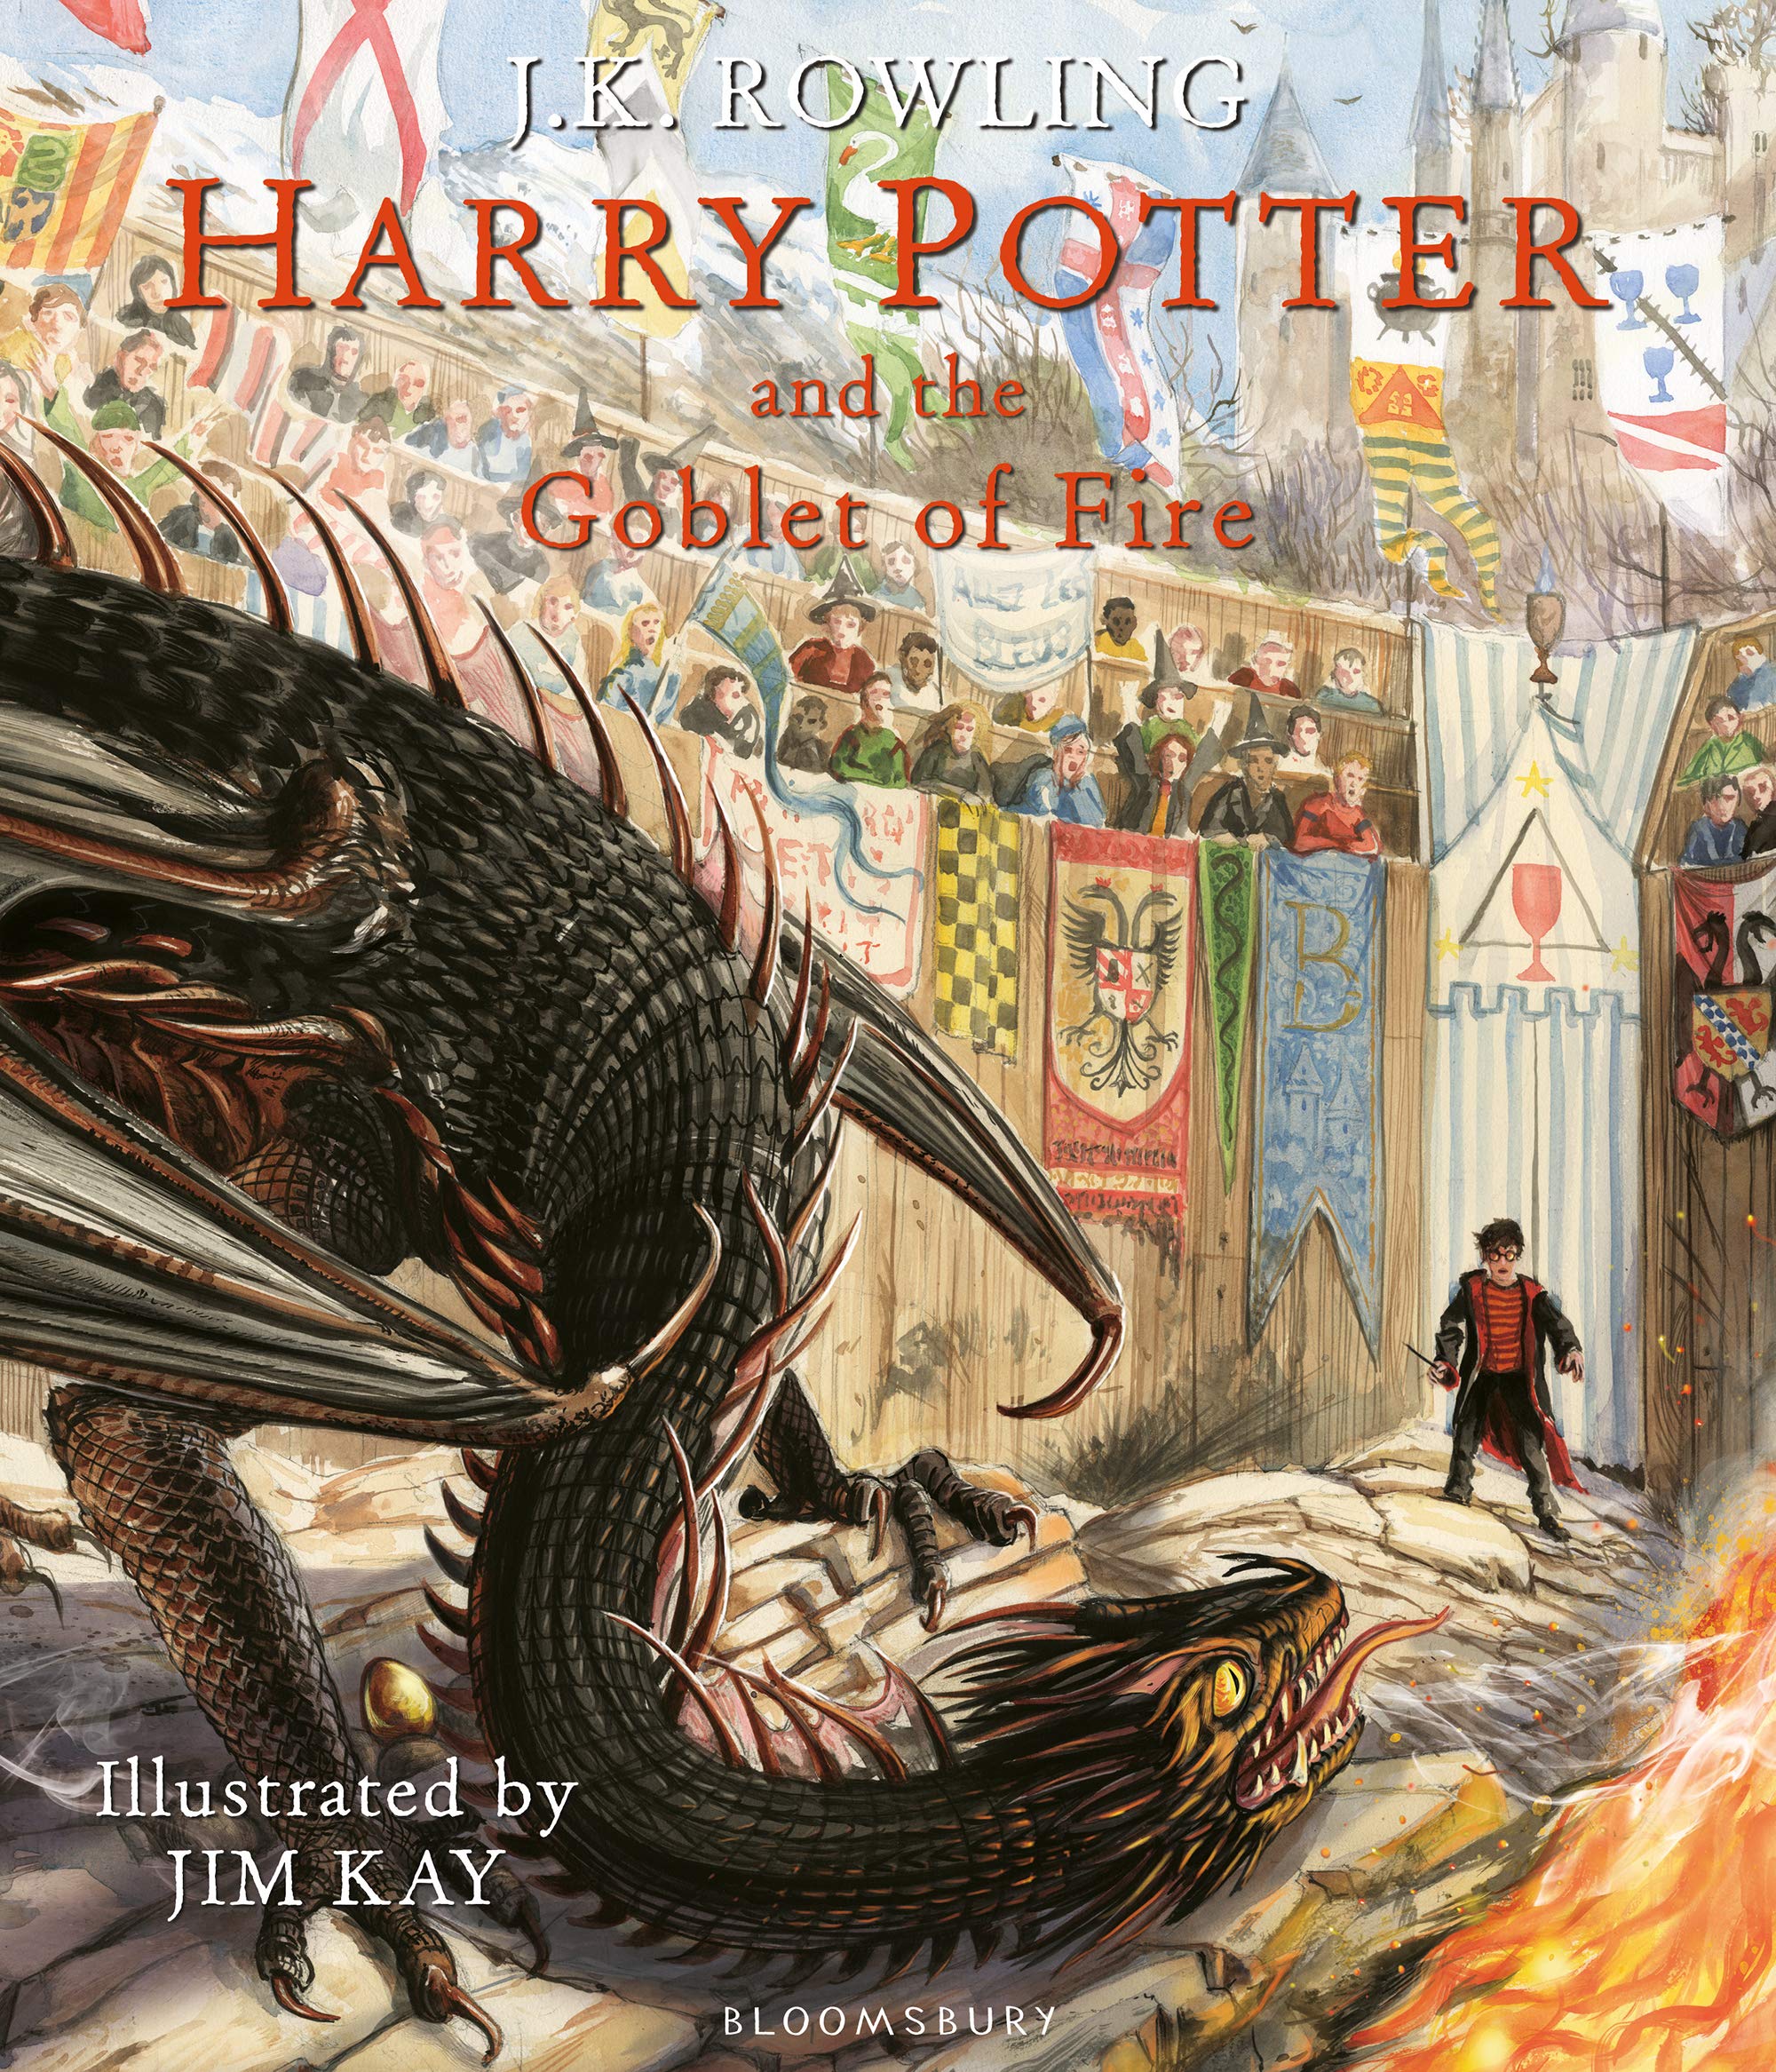 Harry Potter and the Goblet of Fire | J.K. Rowling